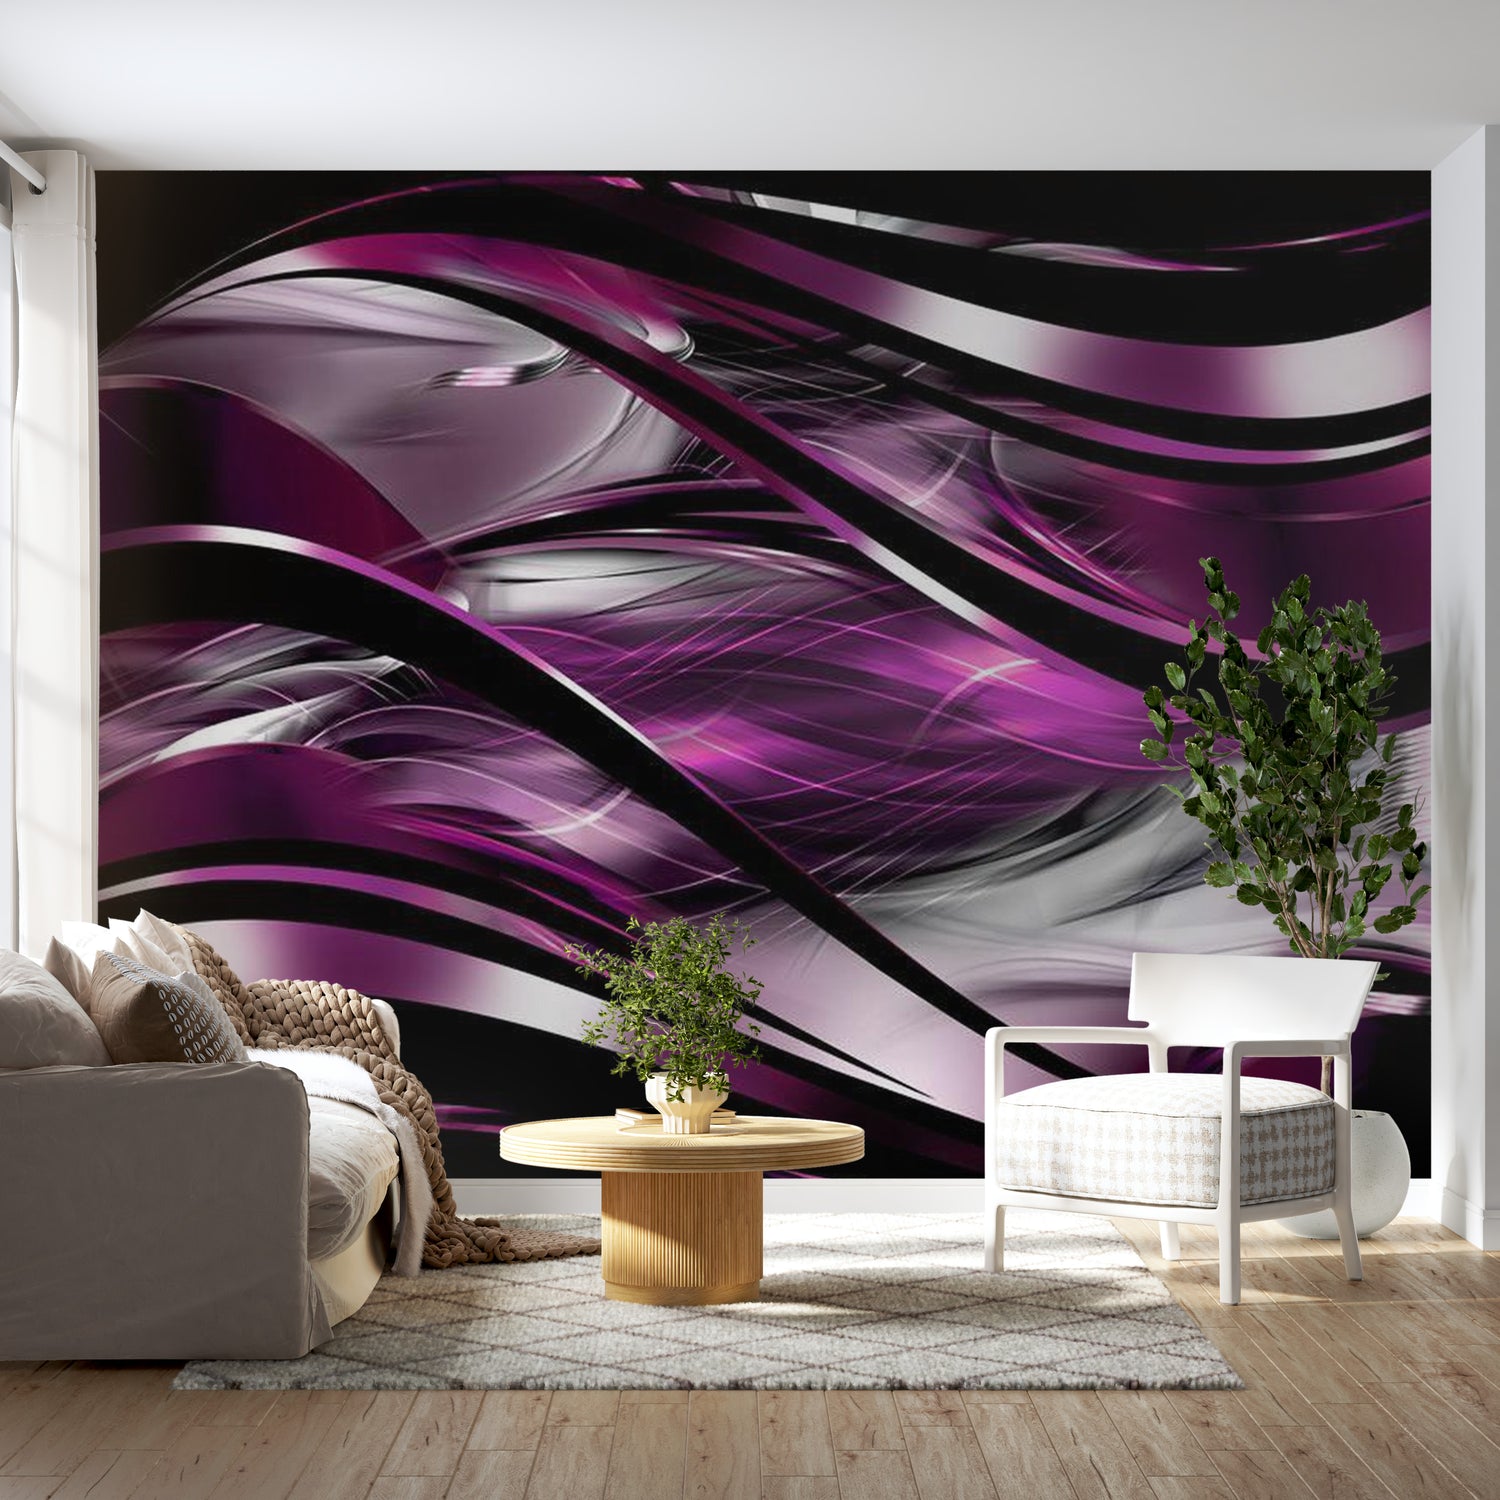 Peel & Stick Glam Wall Mural - Blueberry Dream - Removable Wall Decals